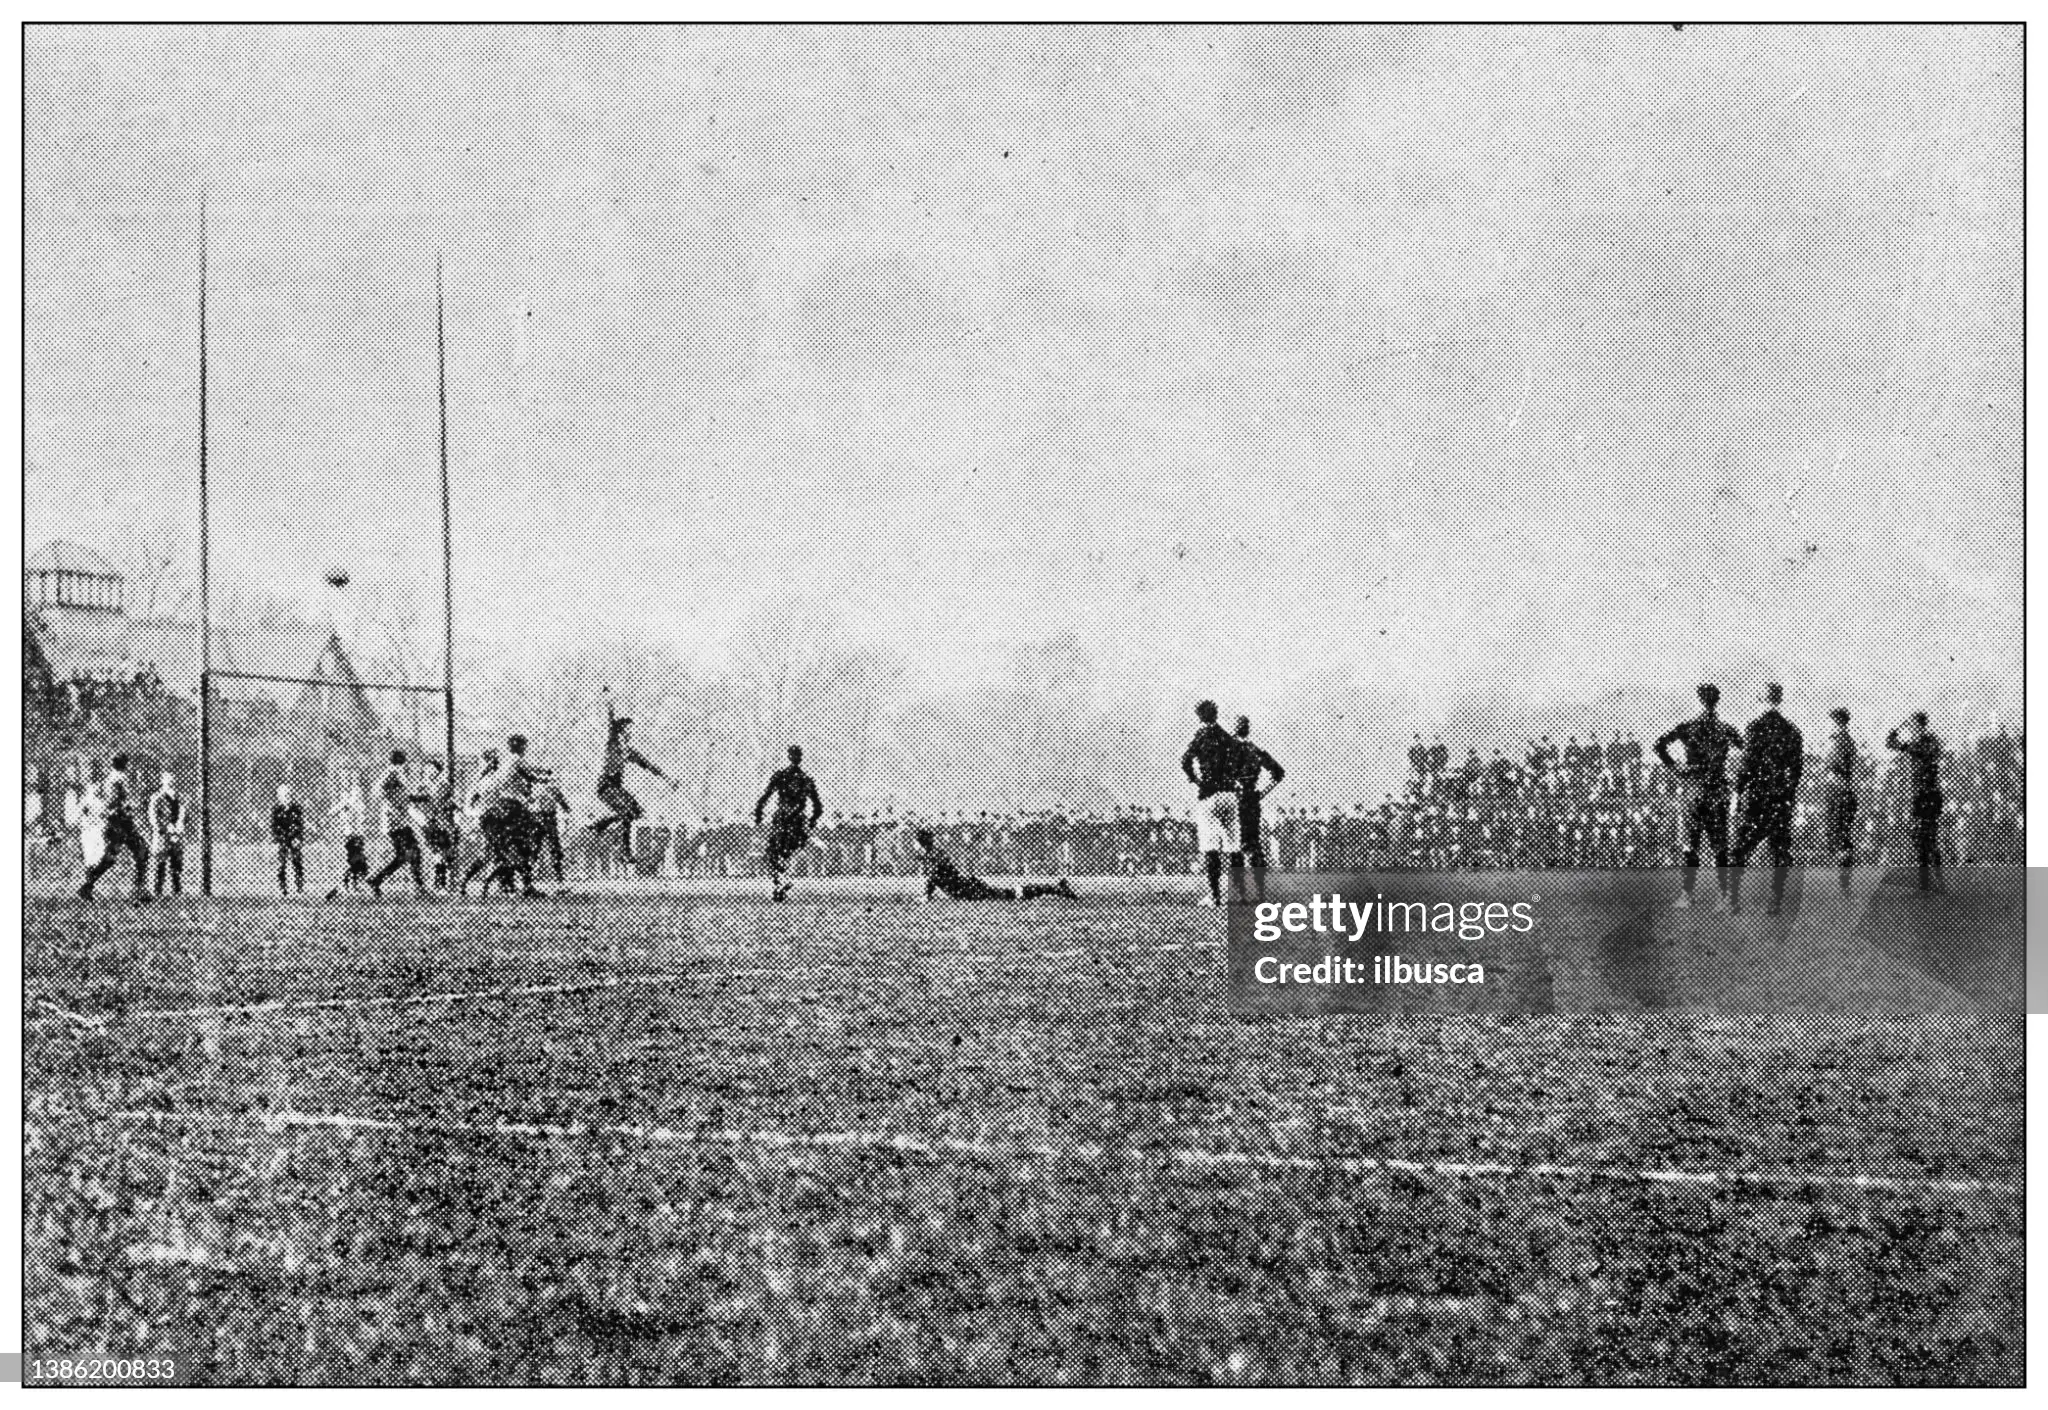 History of rugby - Rugby earliest match